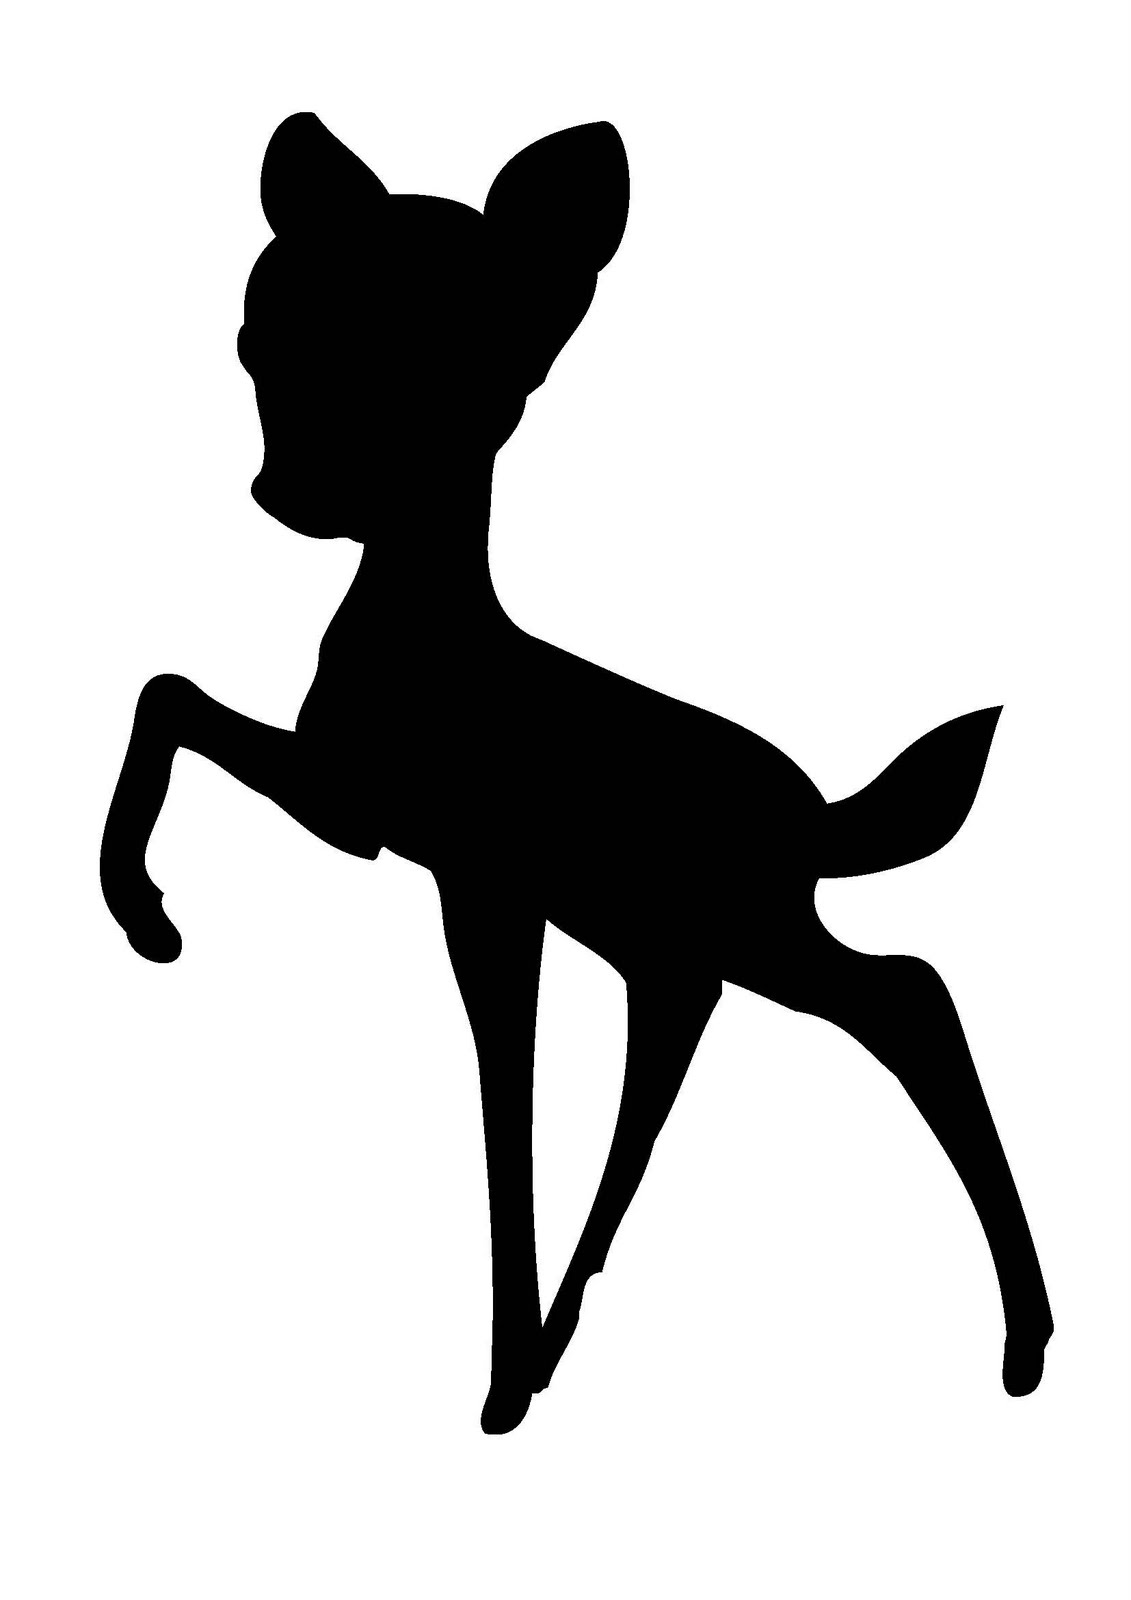 Free Baby Deer Silhouette, Download Free Clip Art, Free Clip.